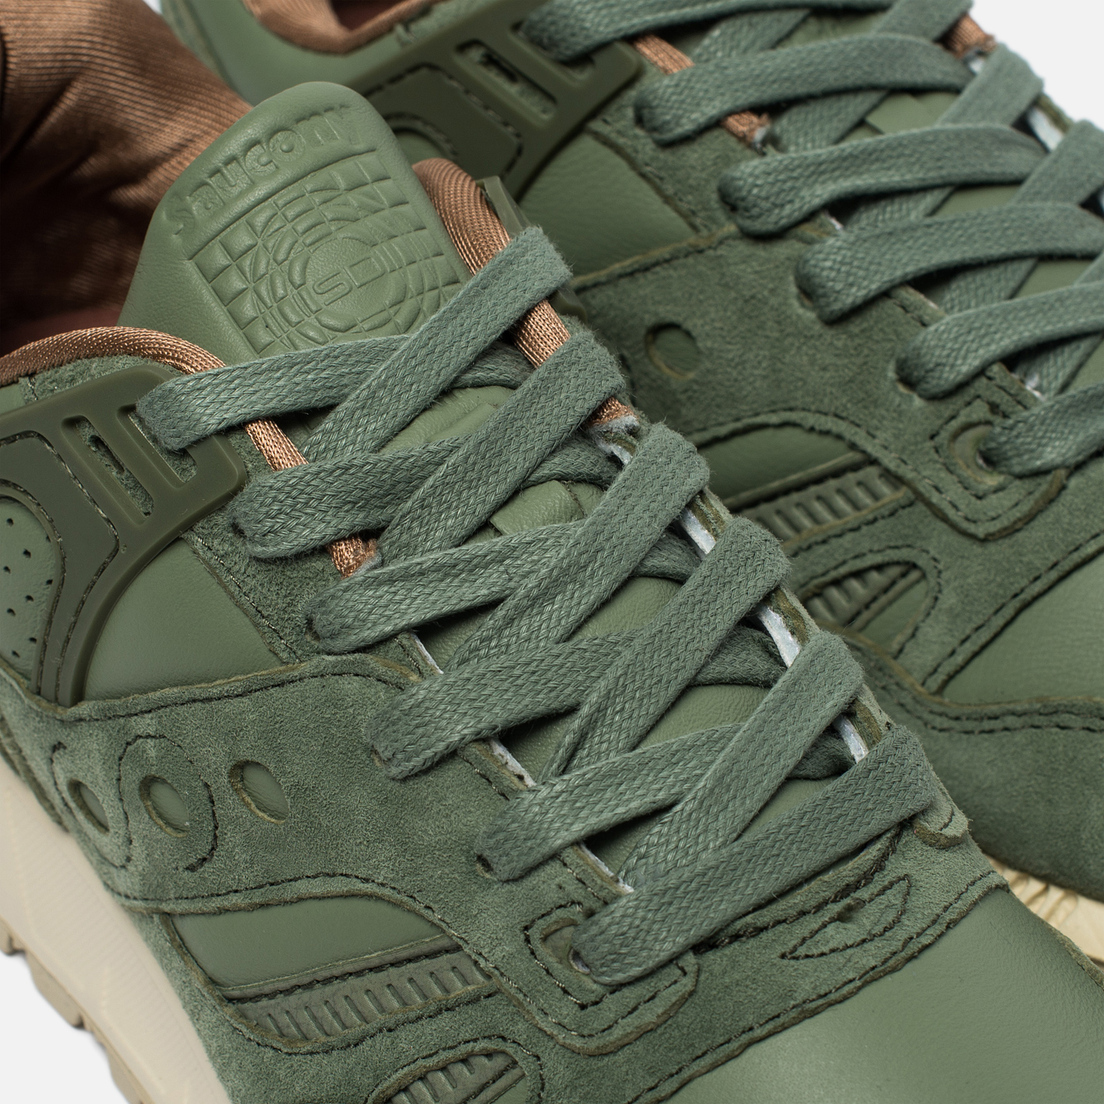 saucony grid sd 'garden pack' oiled green